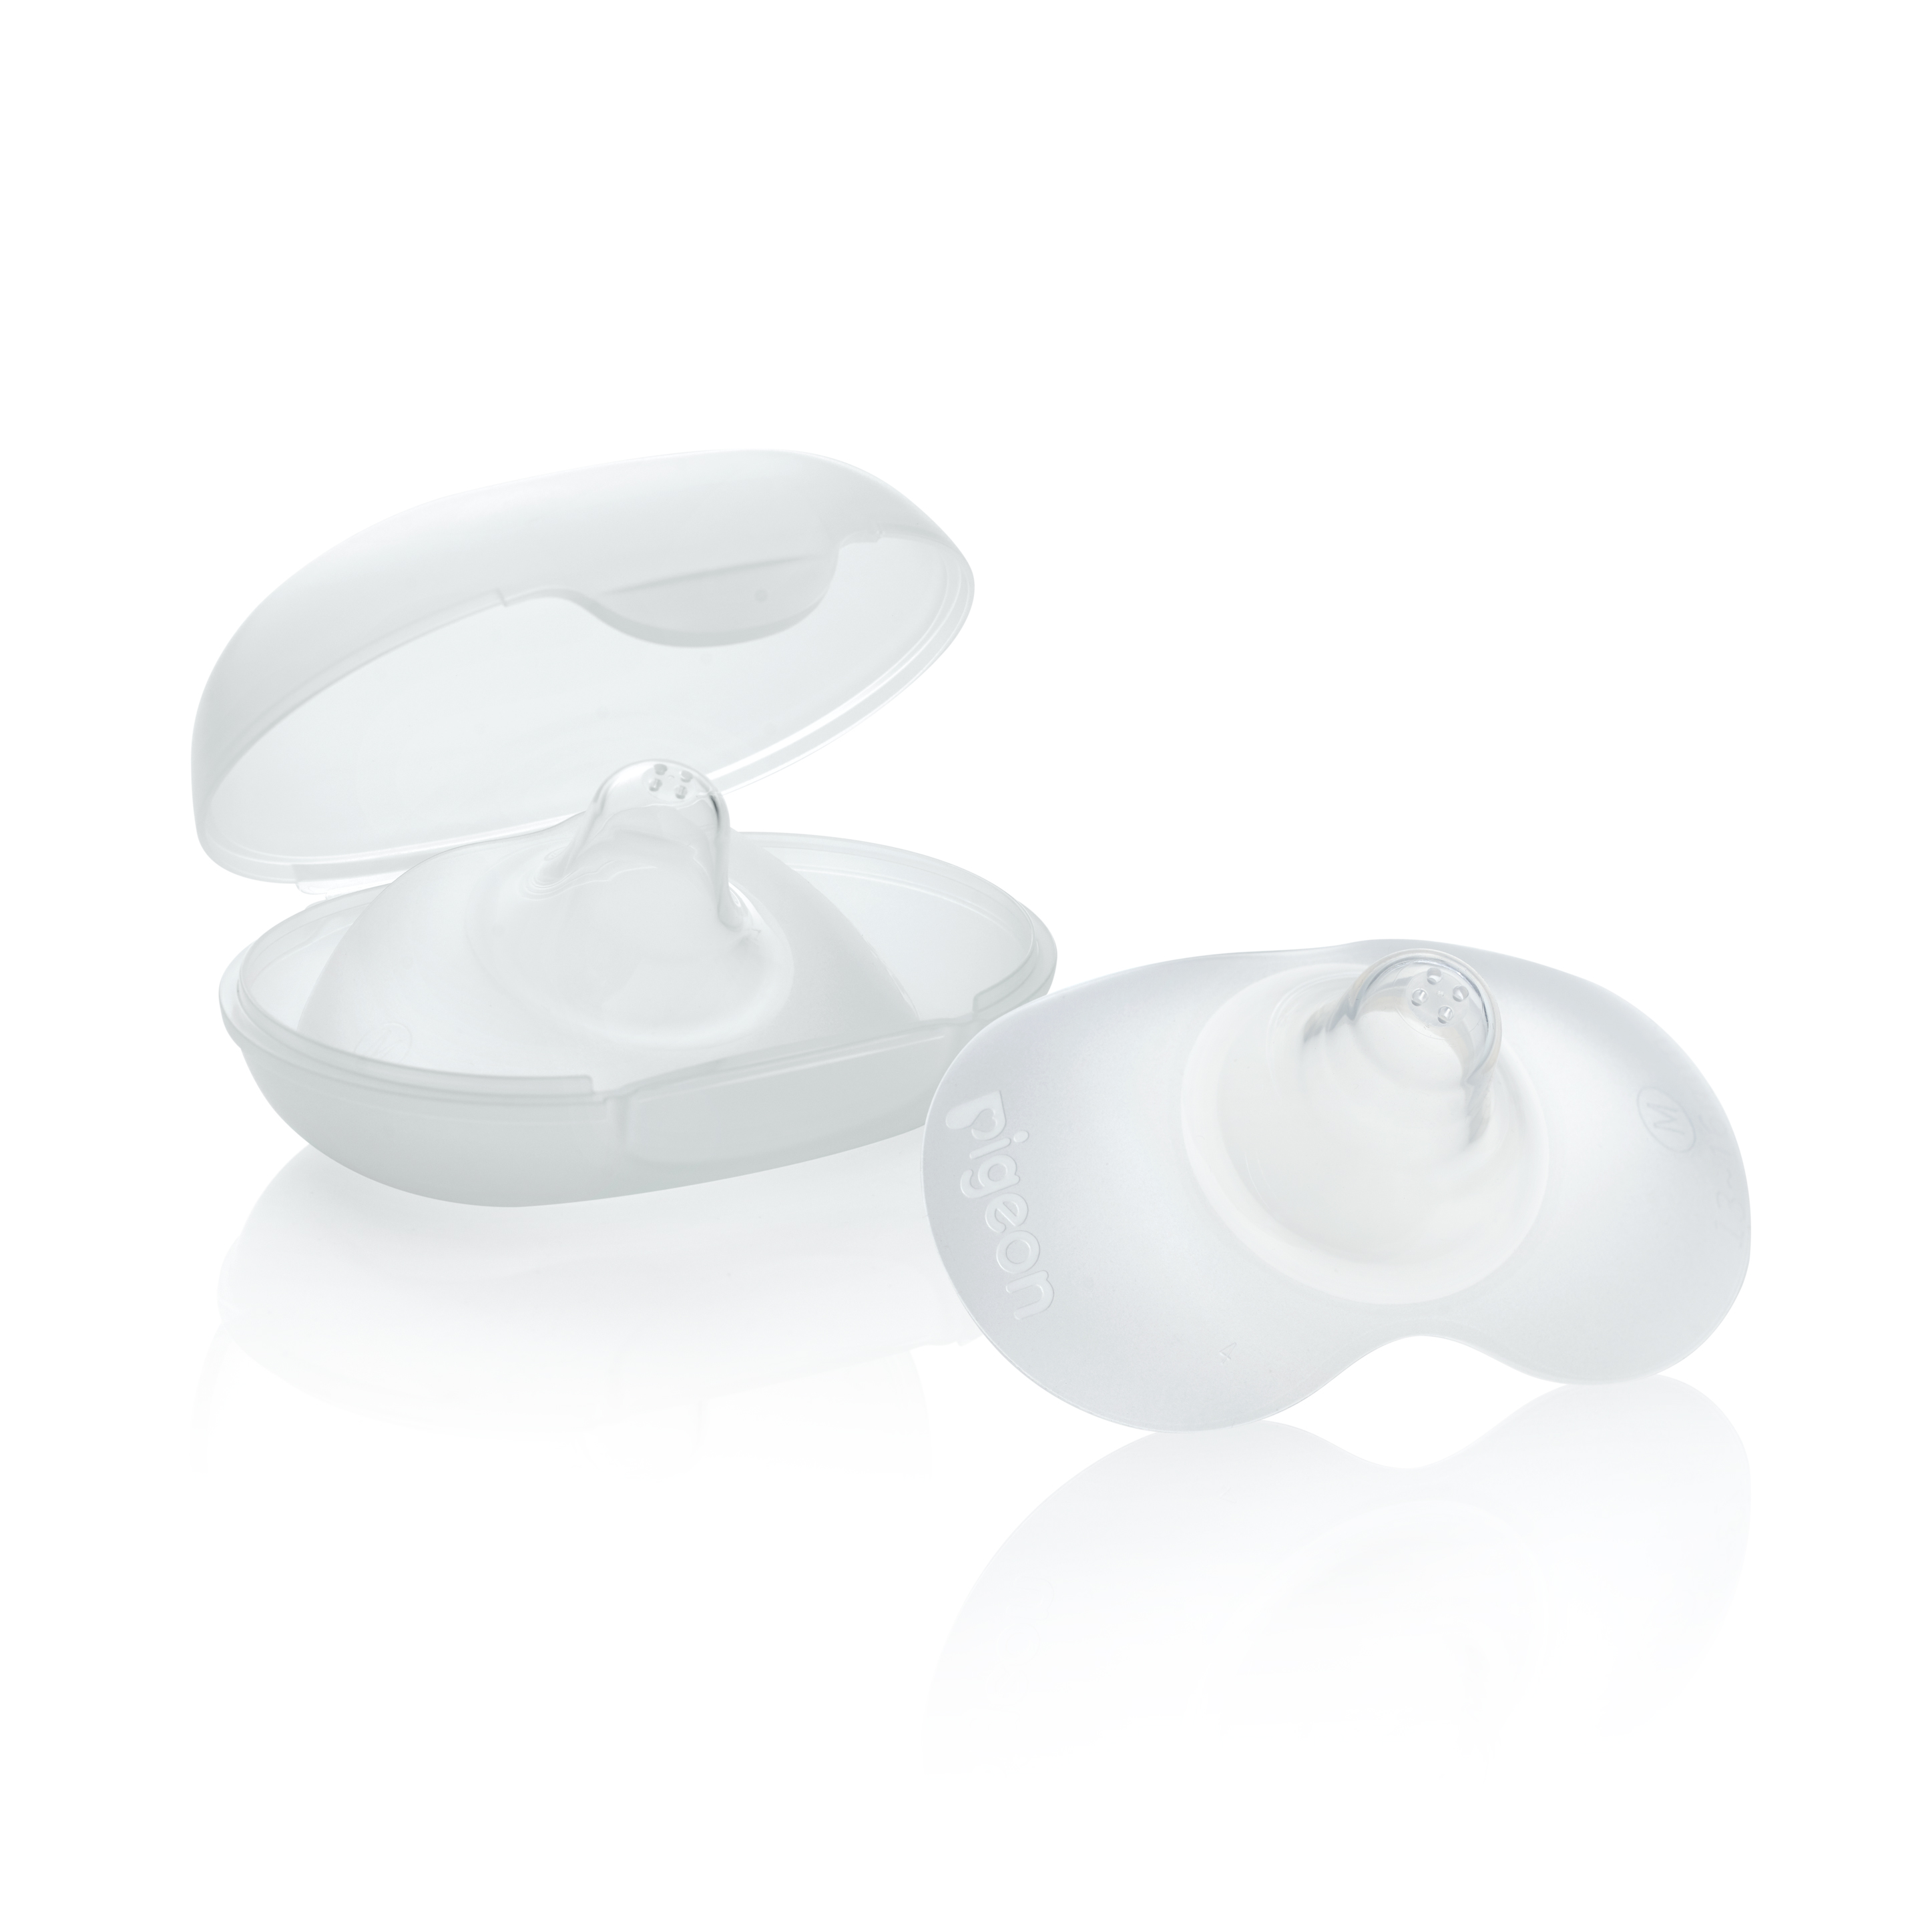 Pigeon Natural Feel Nipple Shield - Size 2 (M) (PG-79318)